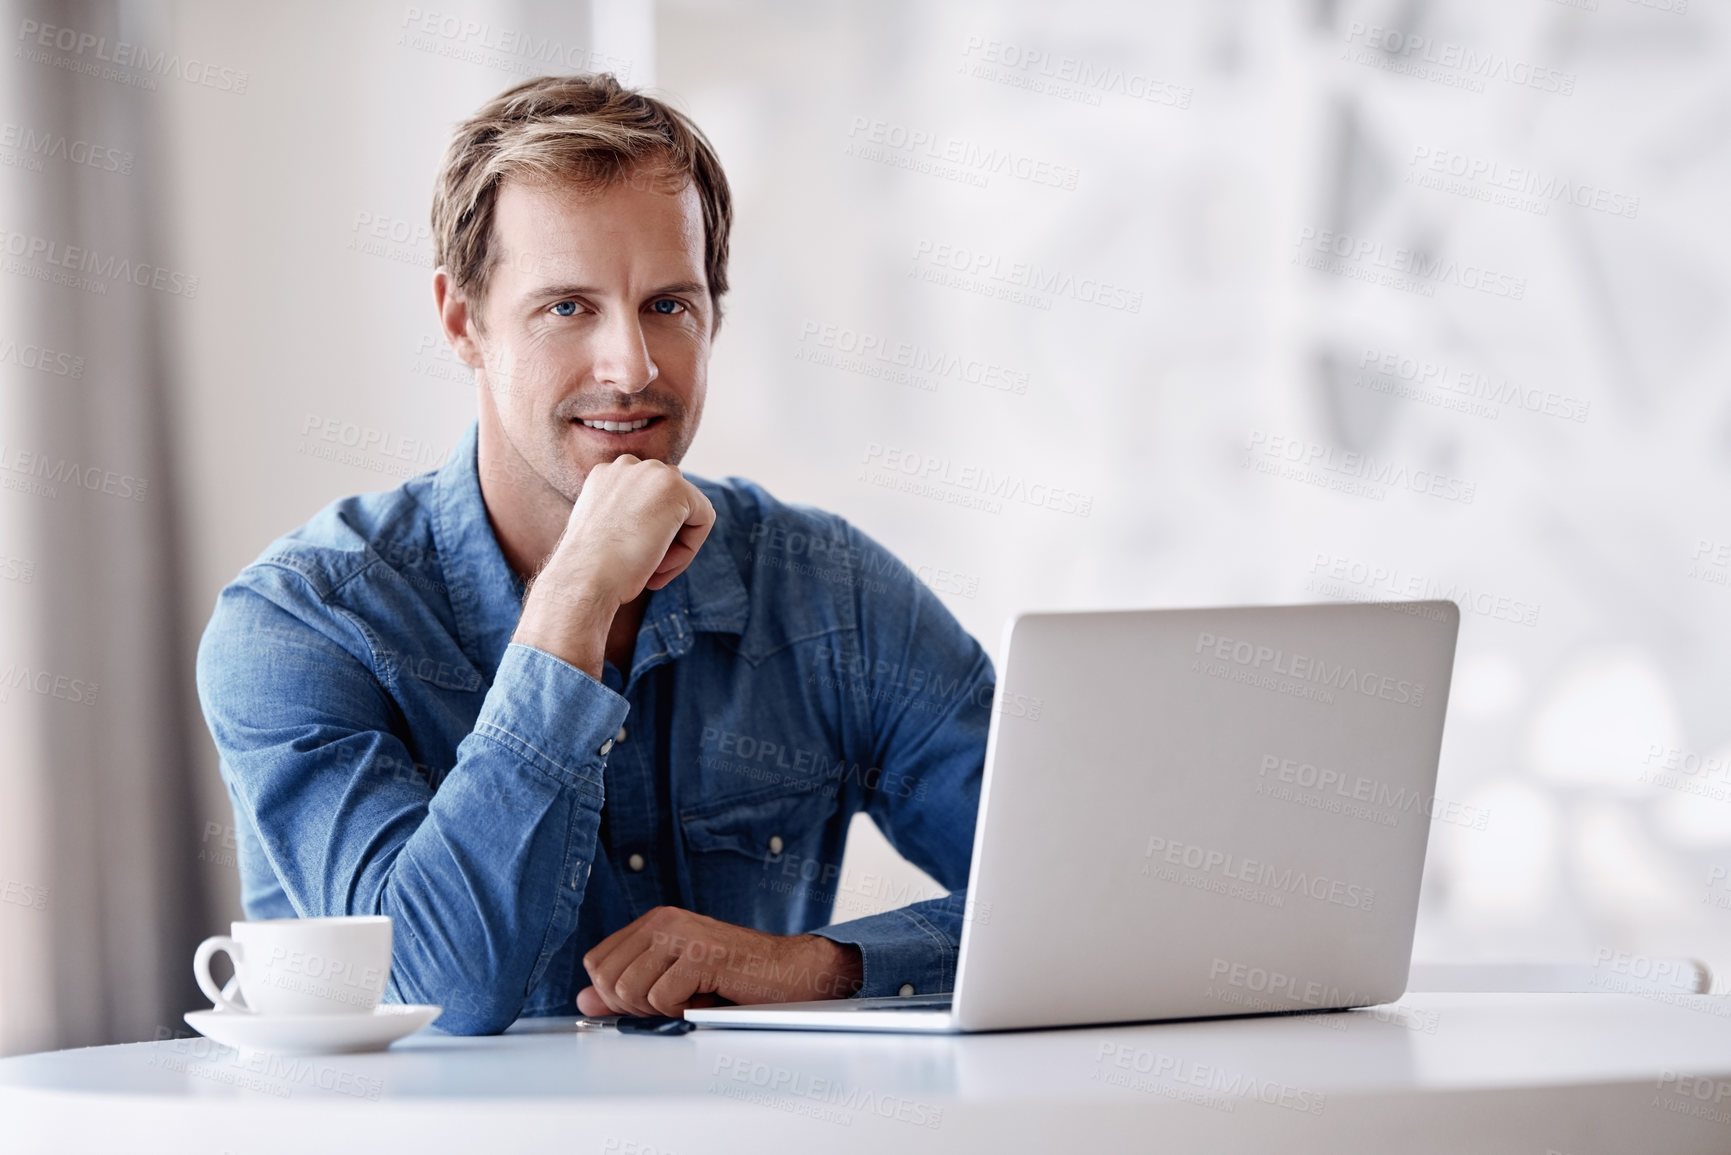 Buy stock photo Cropped portrait of a handsome mature businessman looking thoughtful while working on his laptop in the office